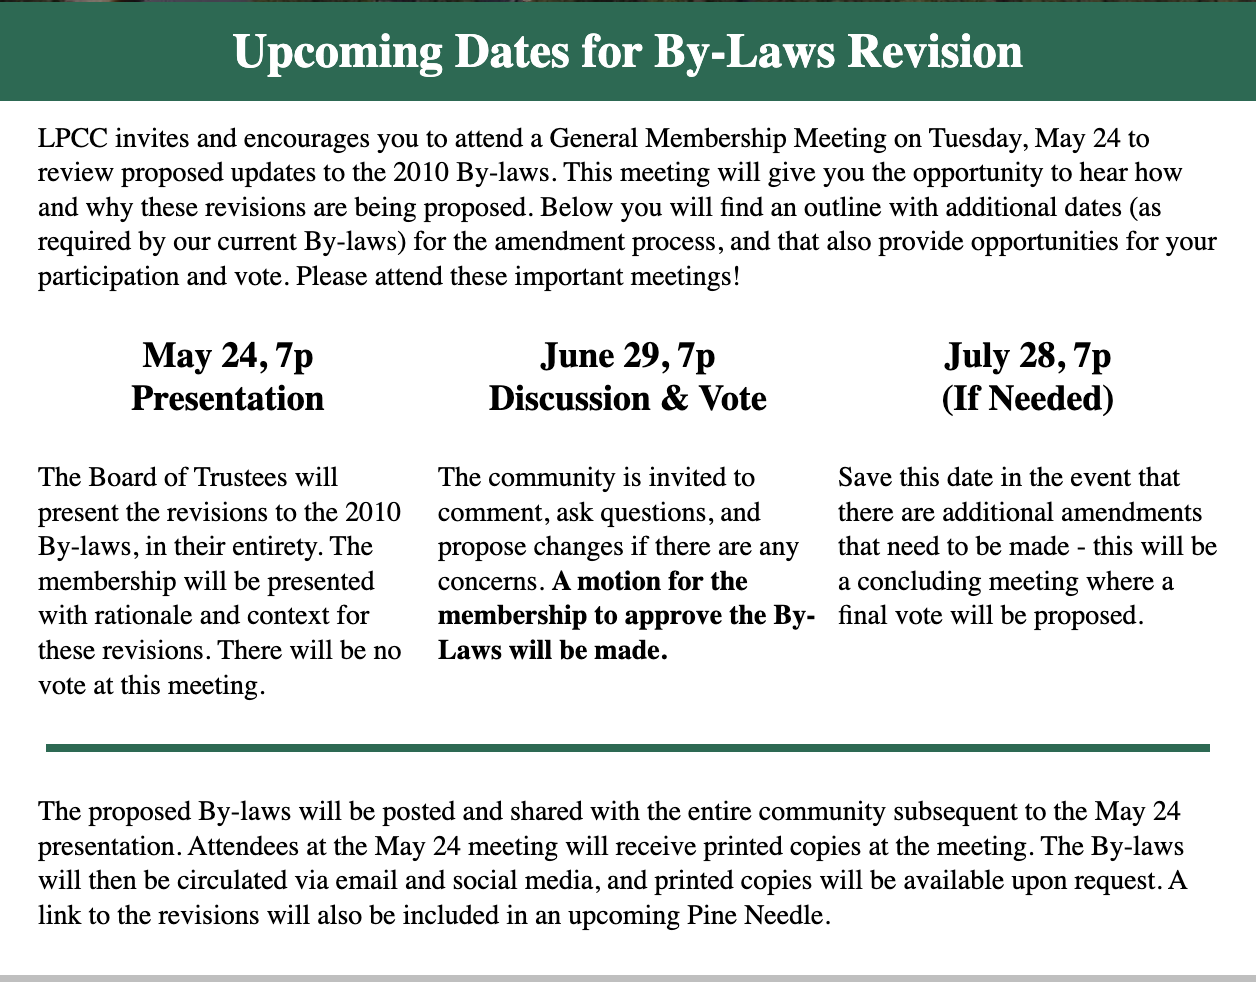 By-laws Revisions